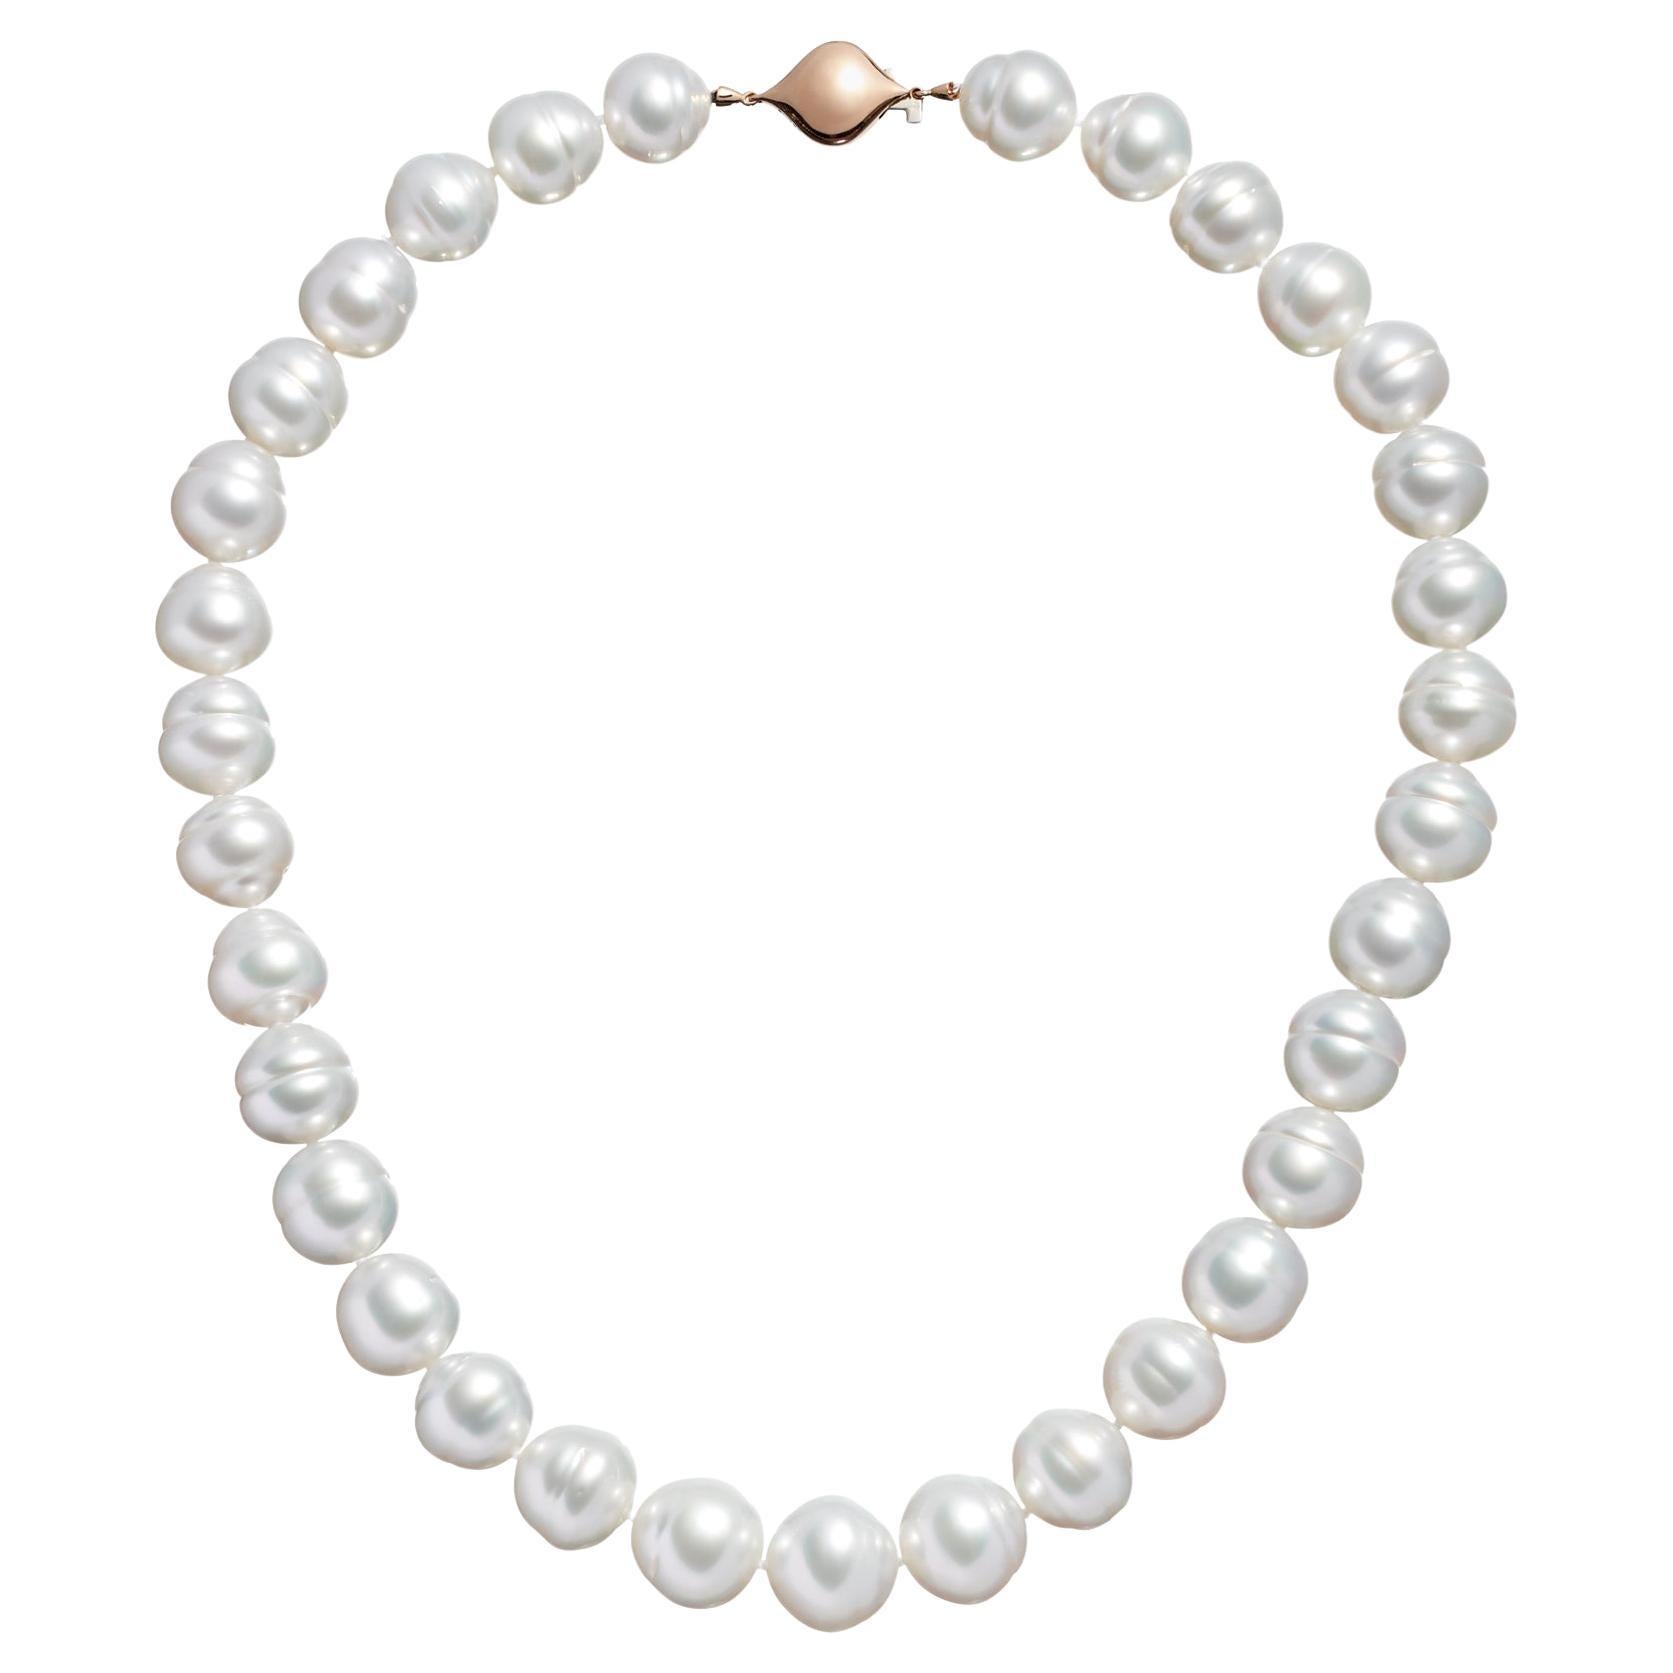 Roseate Jewelry Australian South Sea Circle Pearl Necklace with 18K RG Clasp For Sale